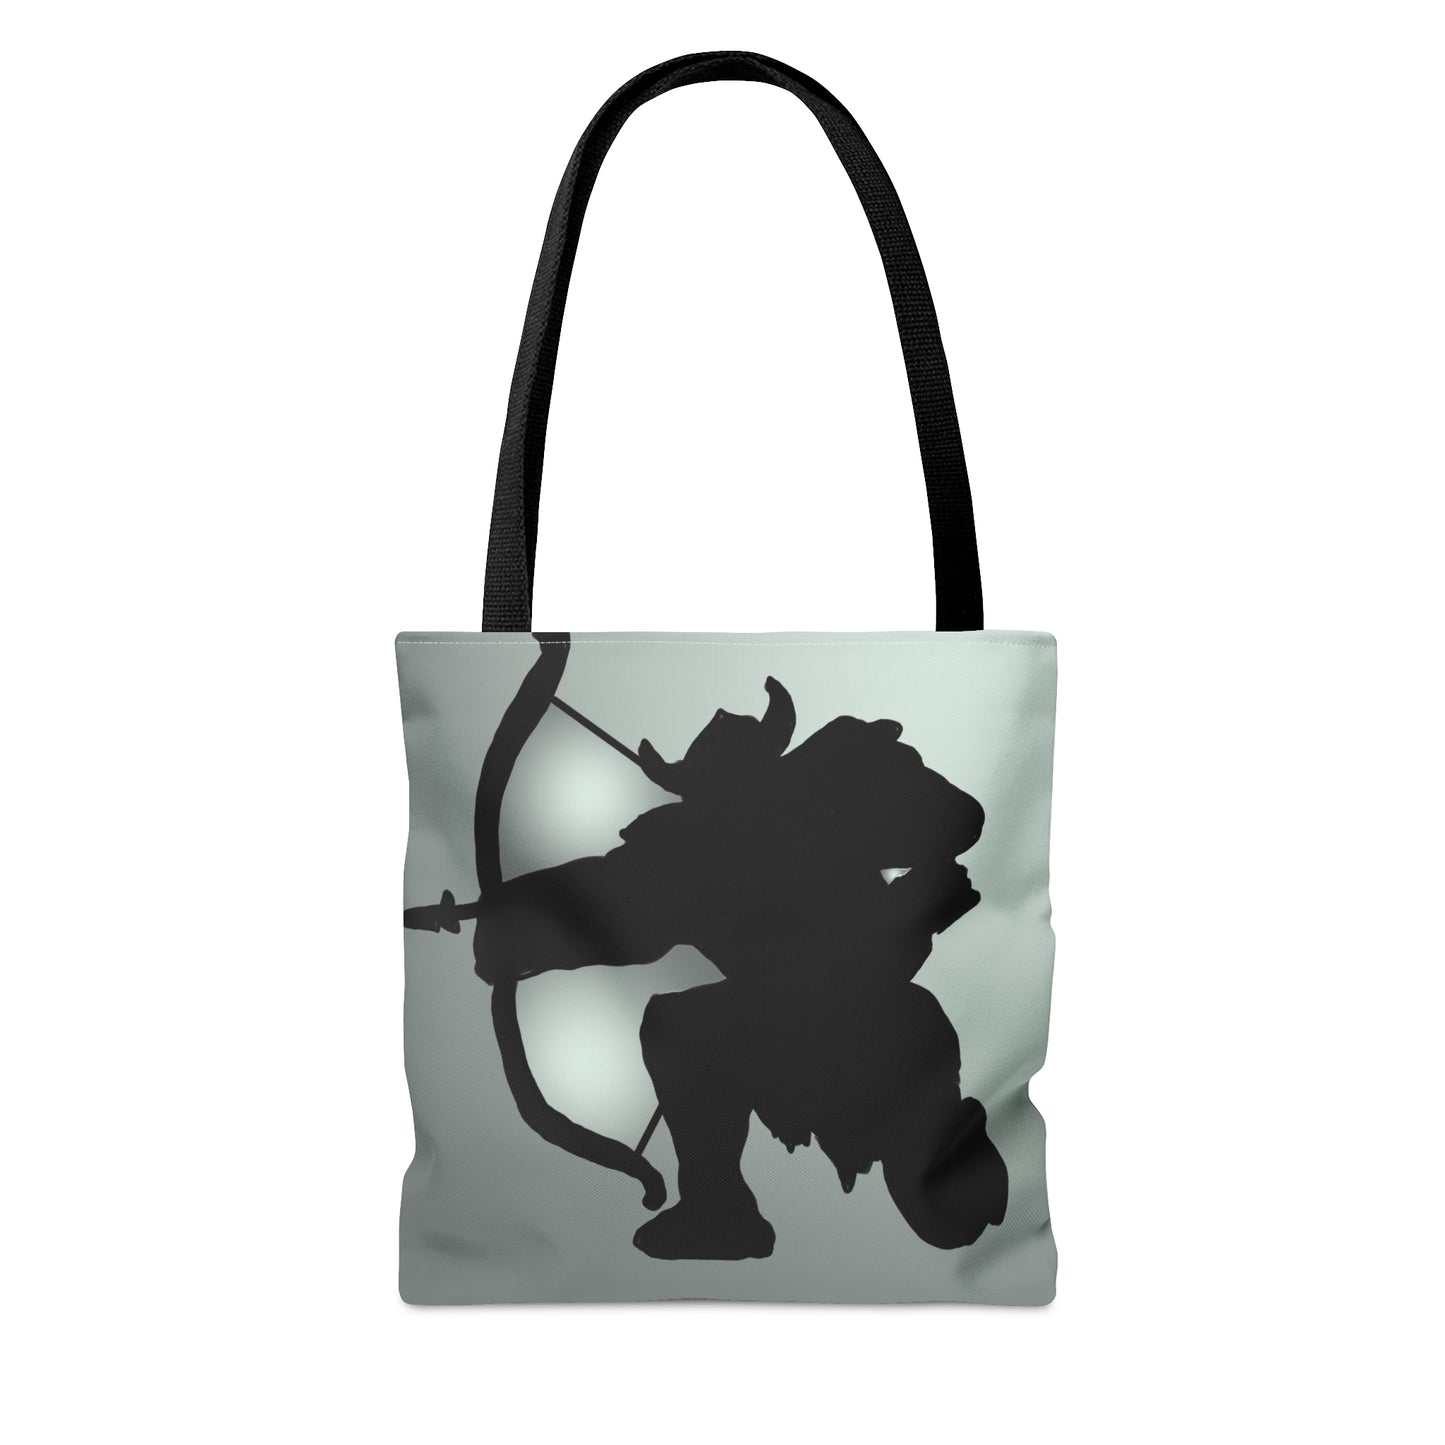 Viking silhouetted tote bag